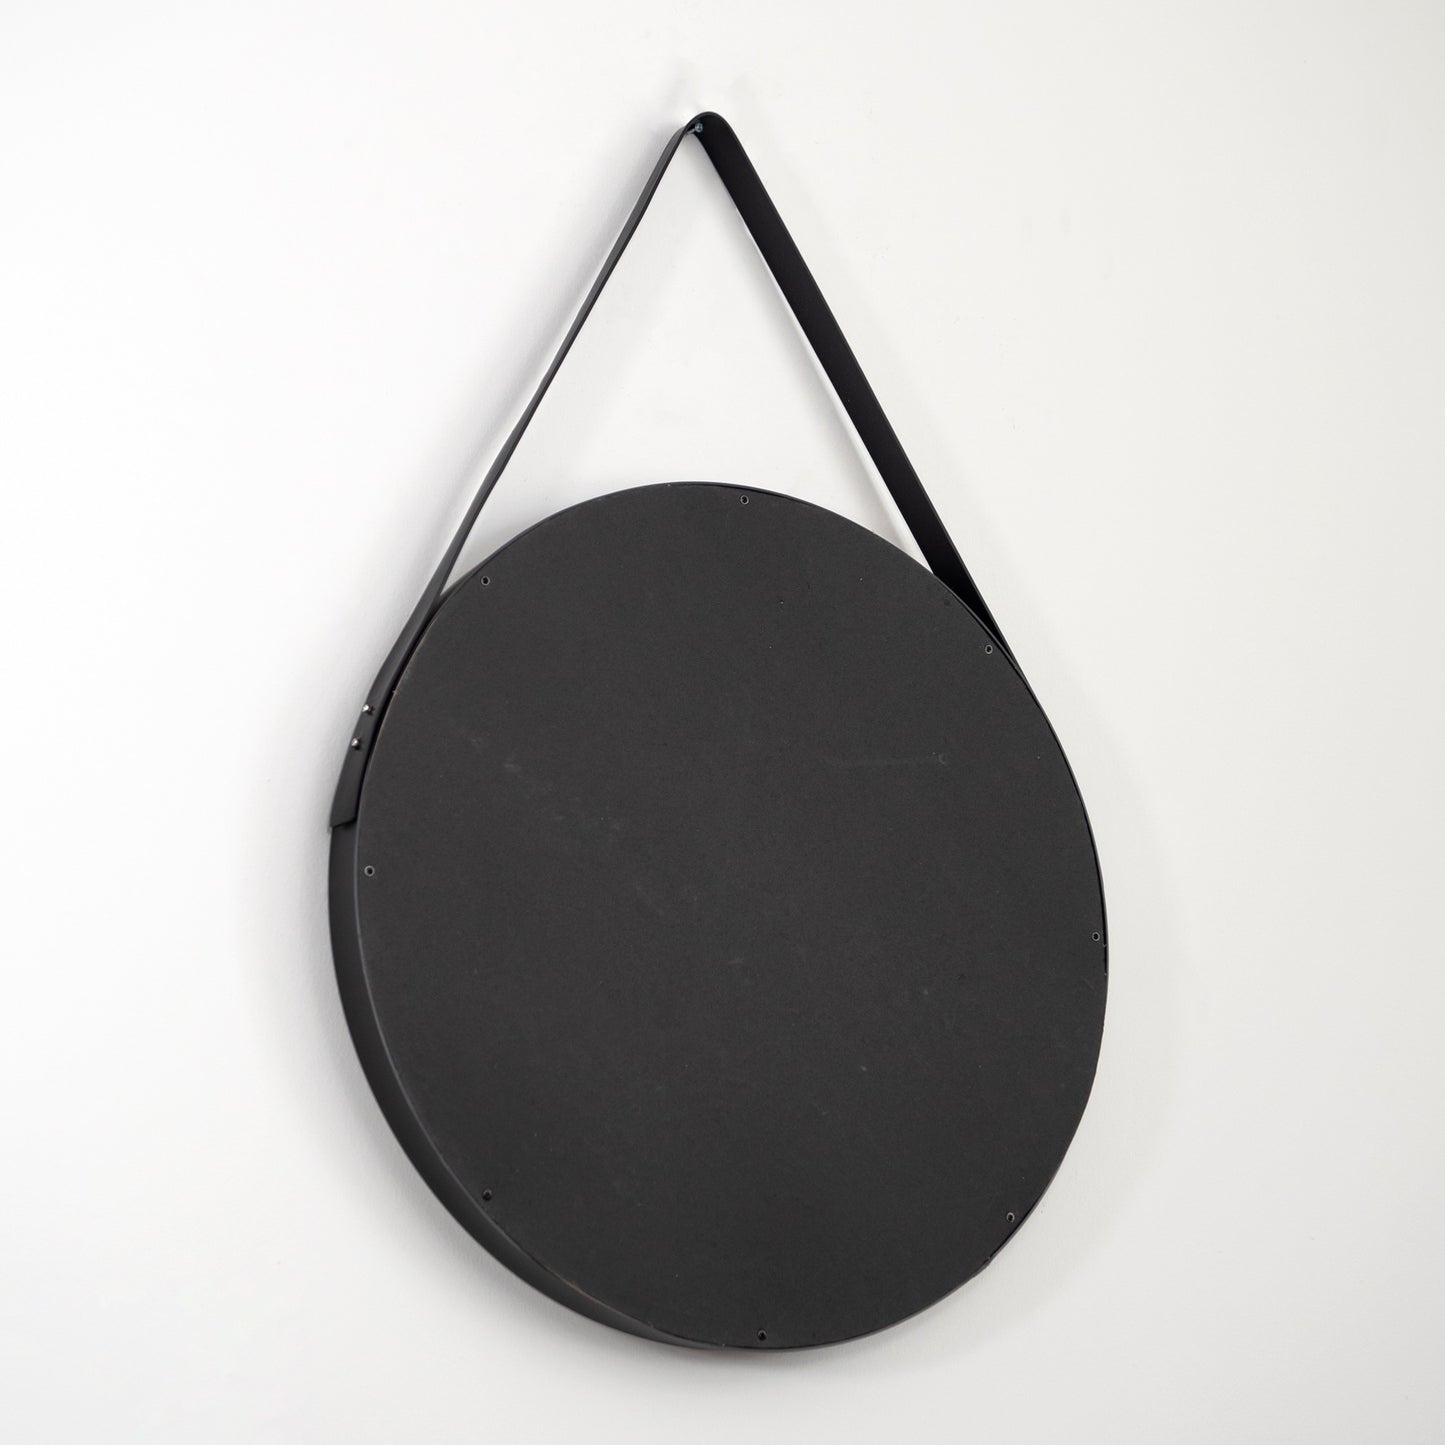 52cm Large Round Wall Mirror with Faux Leather Strap